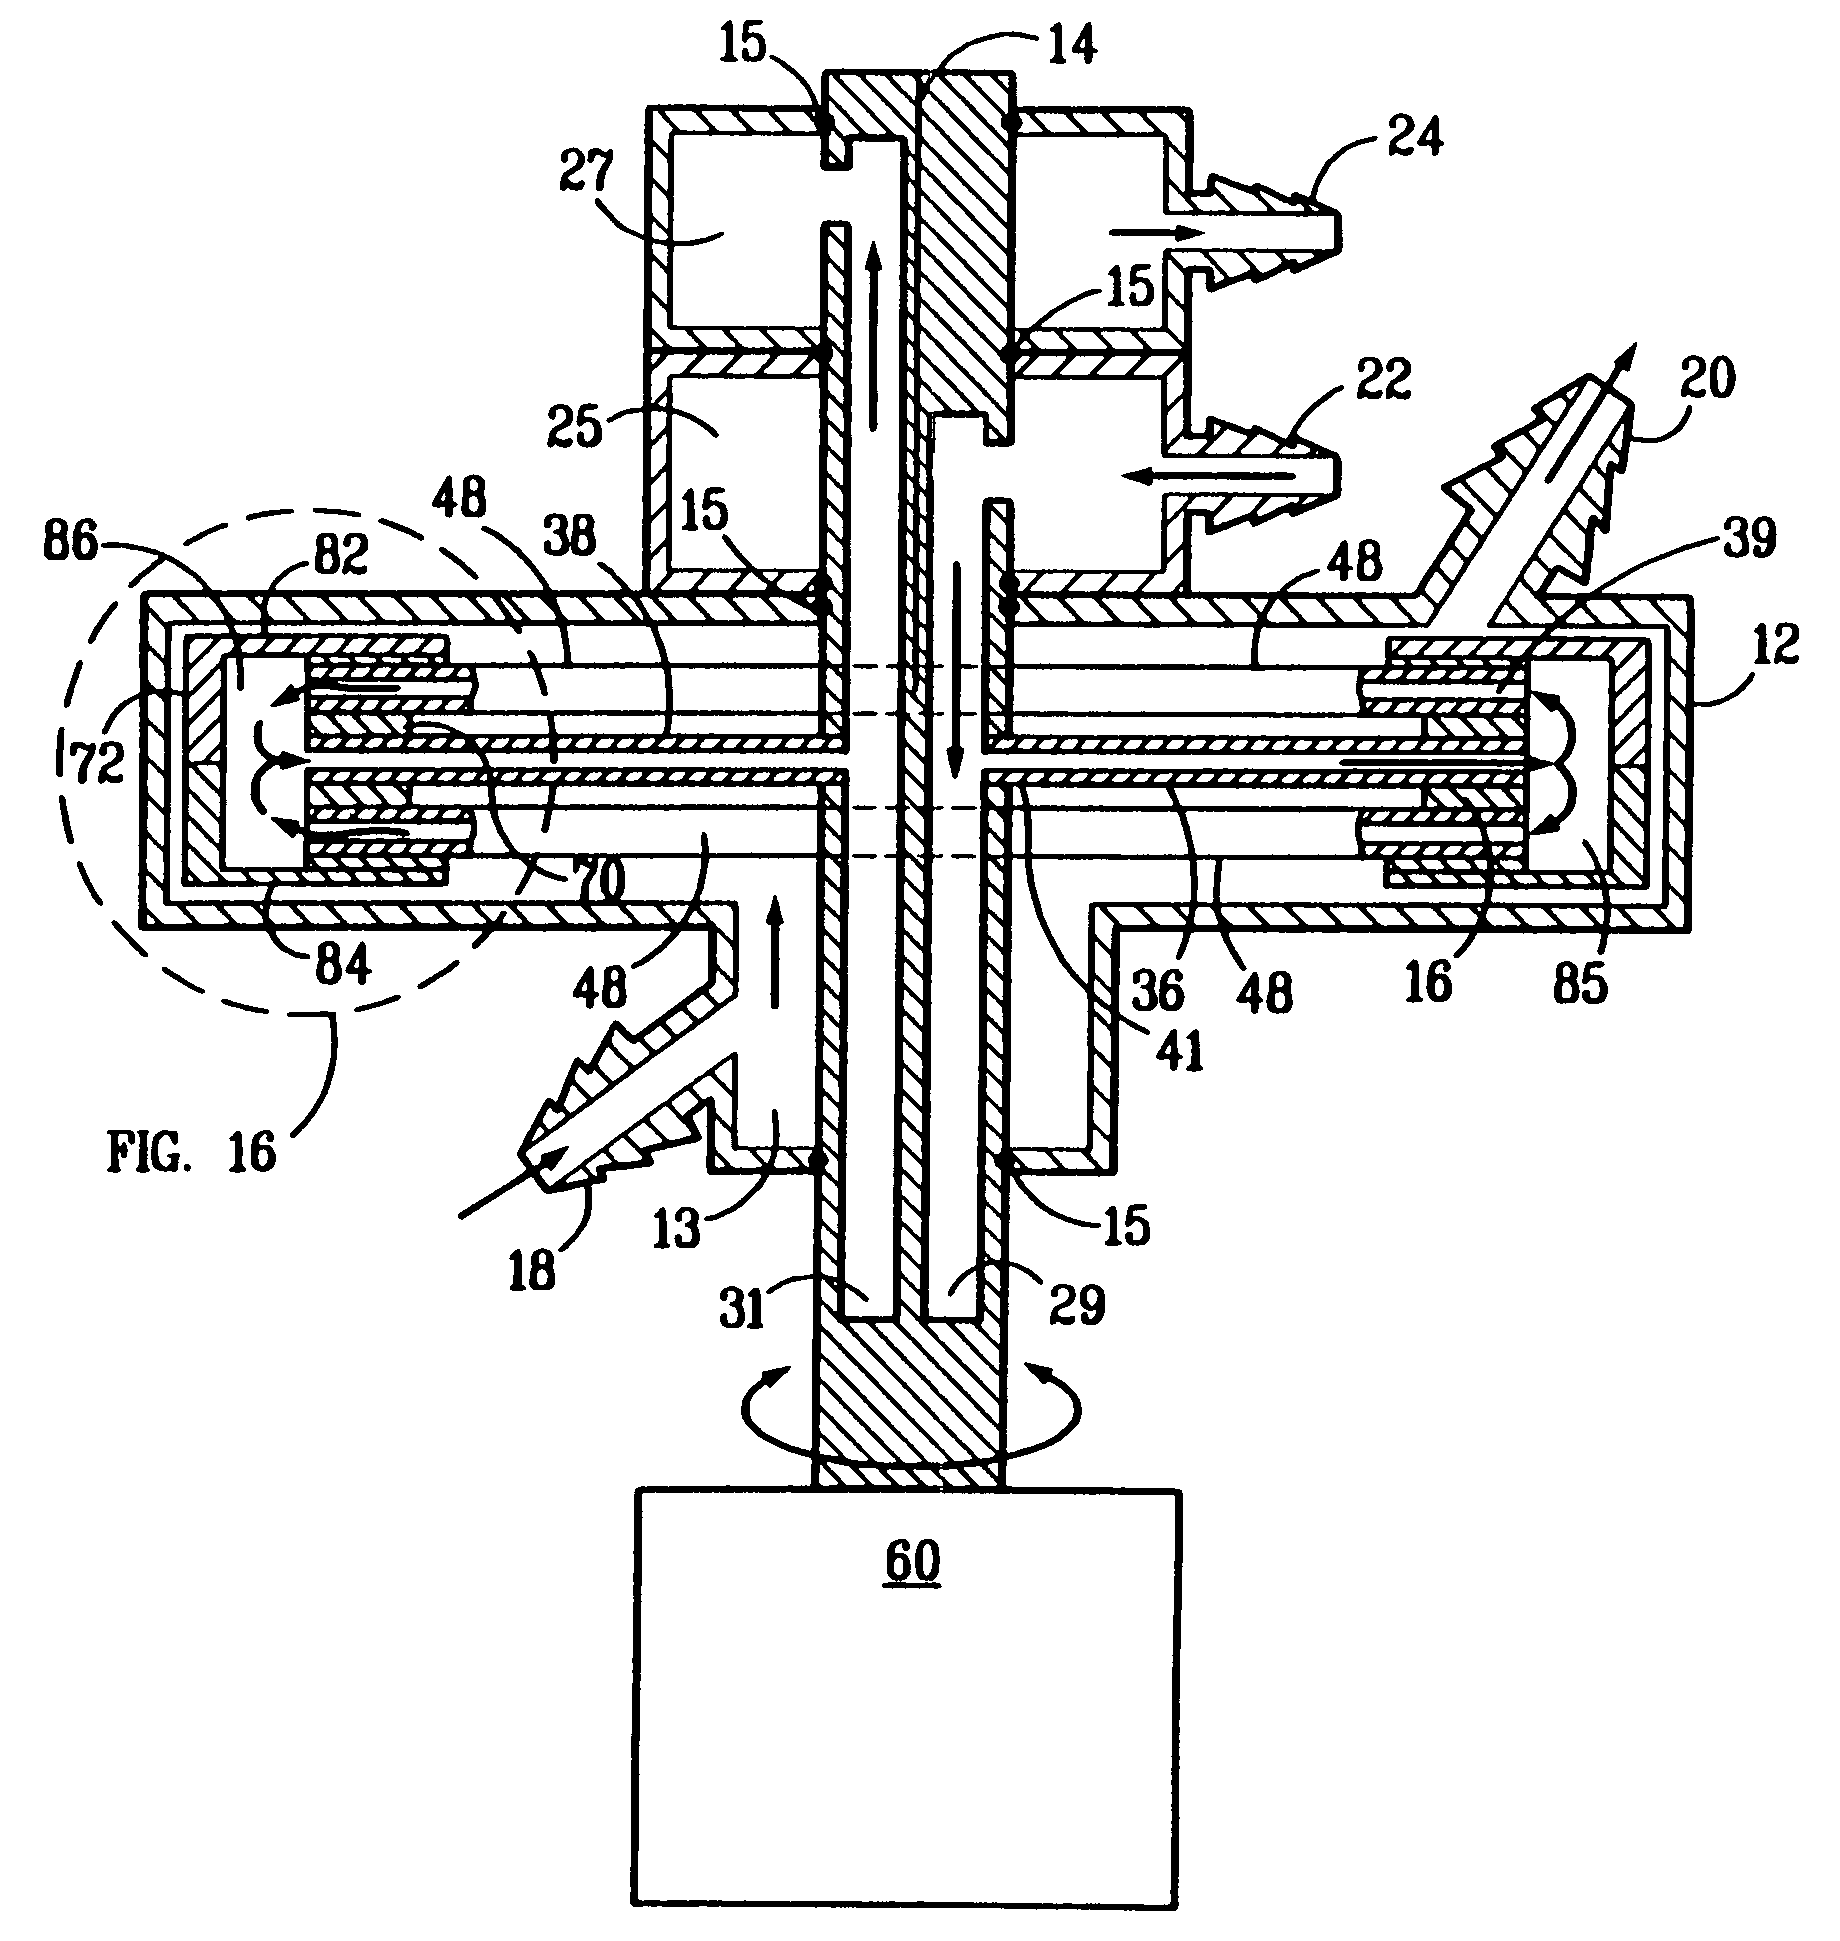 Membrane apparatus with enhanced mass transfer, heat transfer and pumping capabilities via active mixing